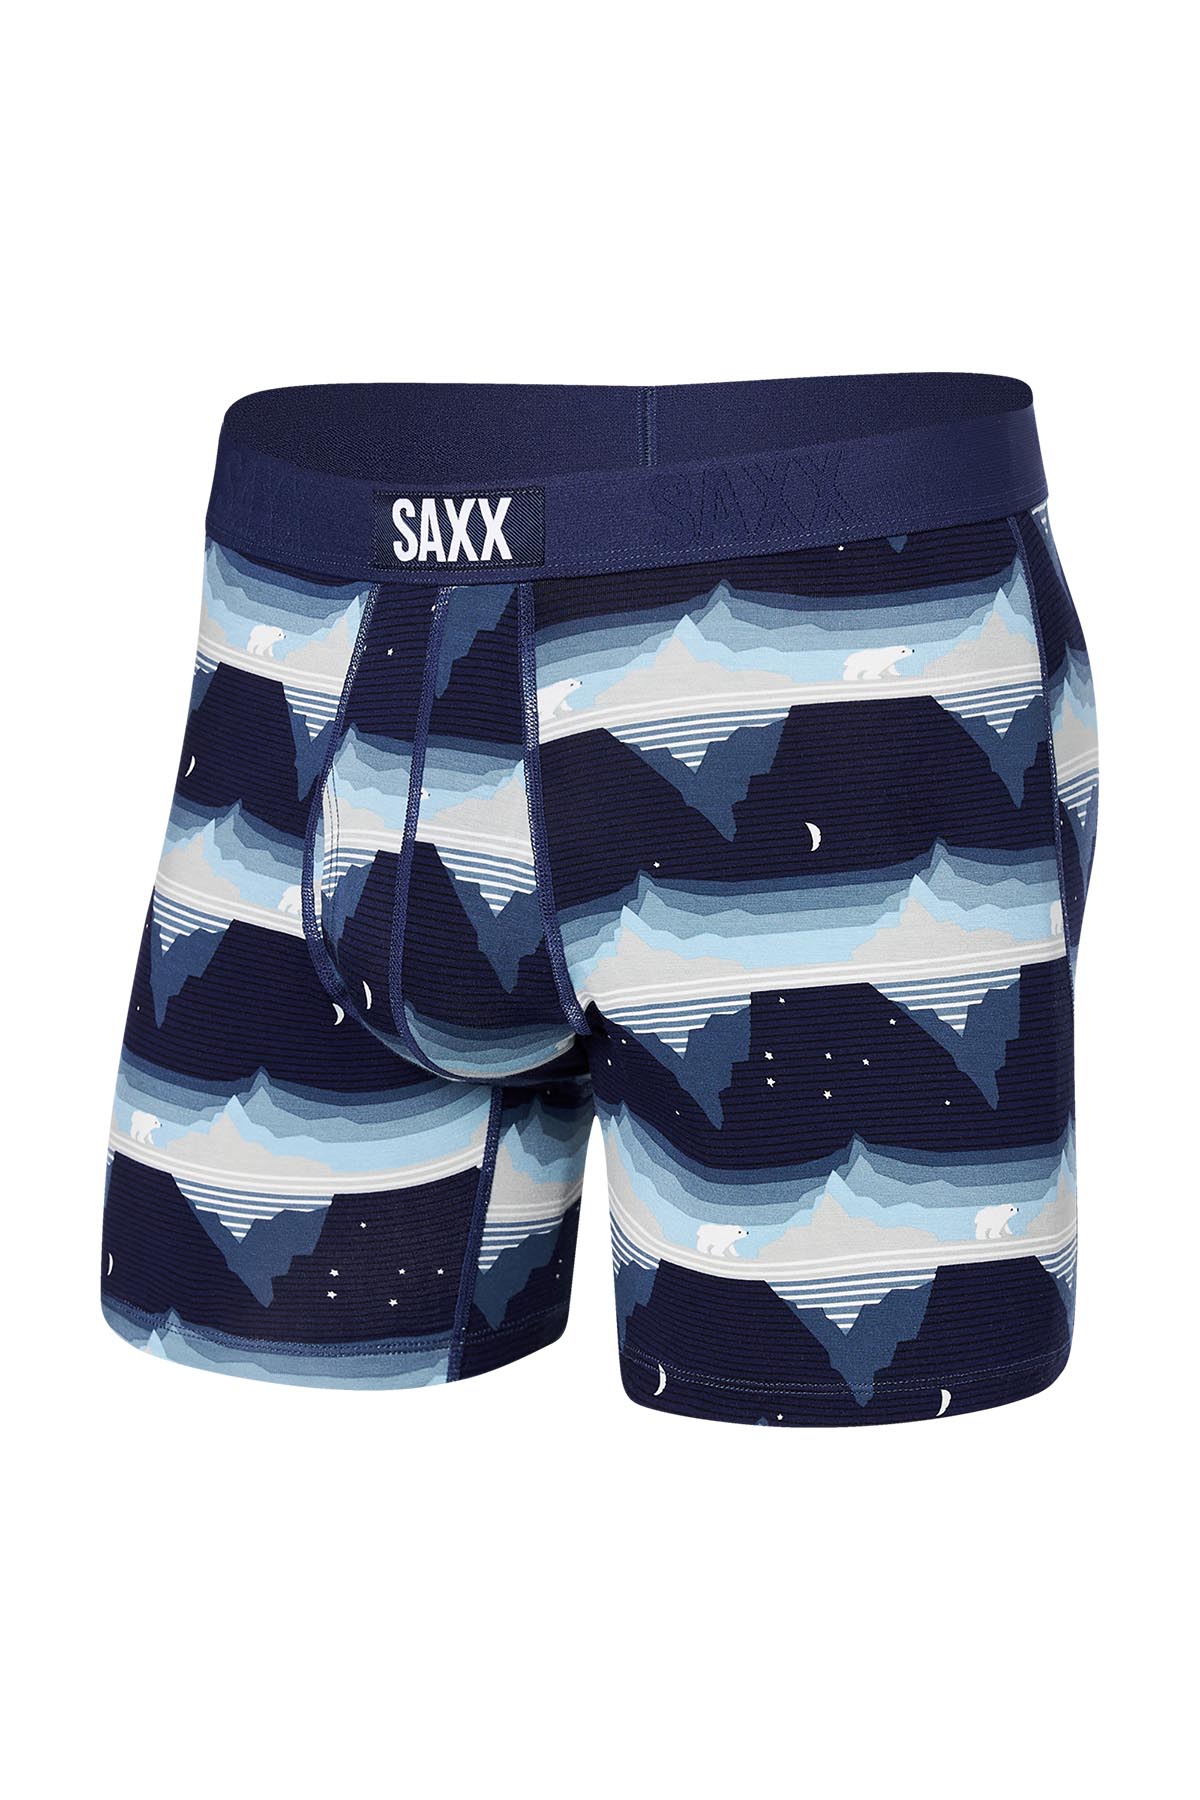 https://cdn11.bigcommerce.com/s-6ehfk/images/stencil/original/products/12354/35533/Saxx-Ultra-Boxer-Brief-Fly-Go-With-The-Floe-Navy-SXBB30F-FLO-1__59568.1697778020.jpg?c=2?c=2&imbypass=on&imbypass=on